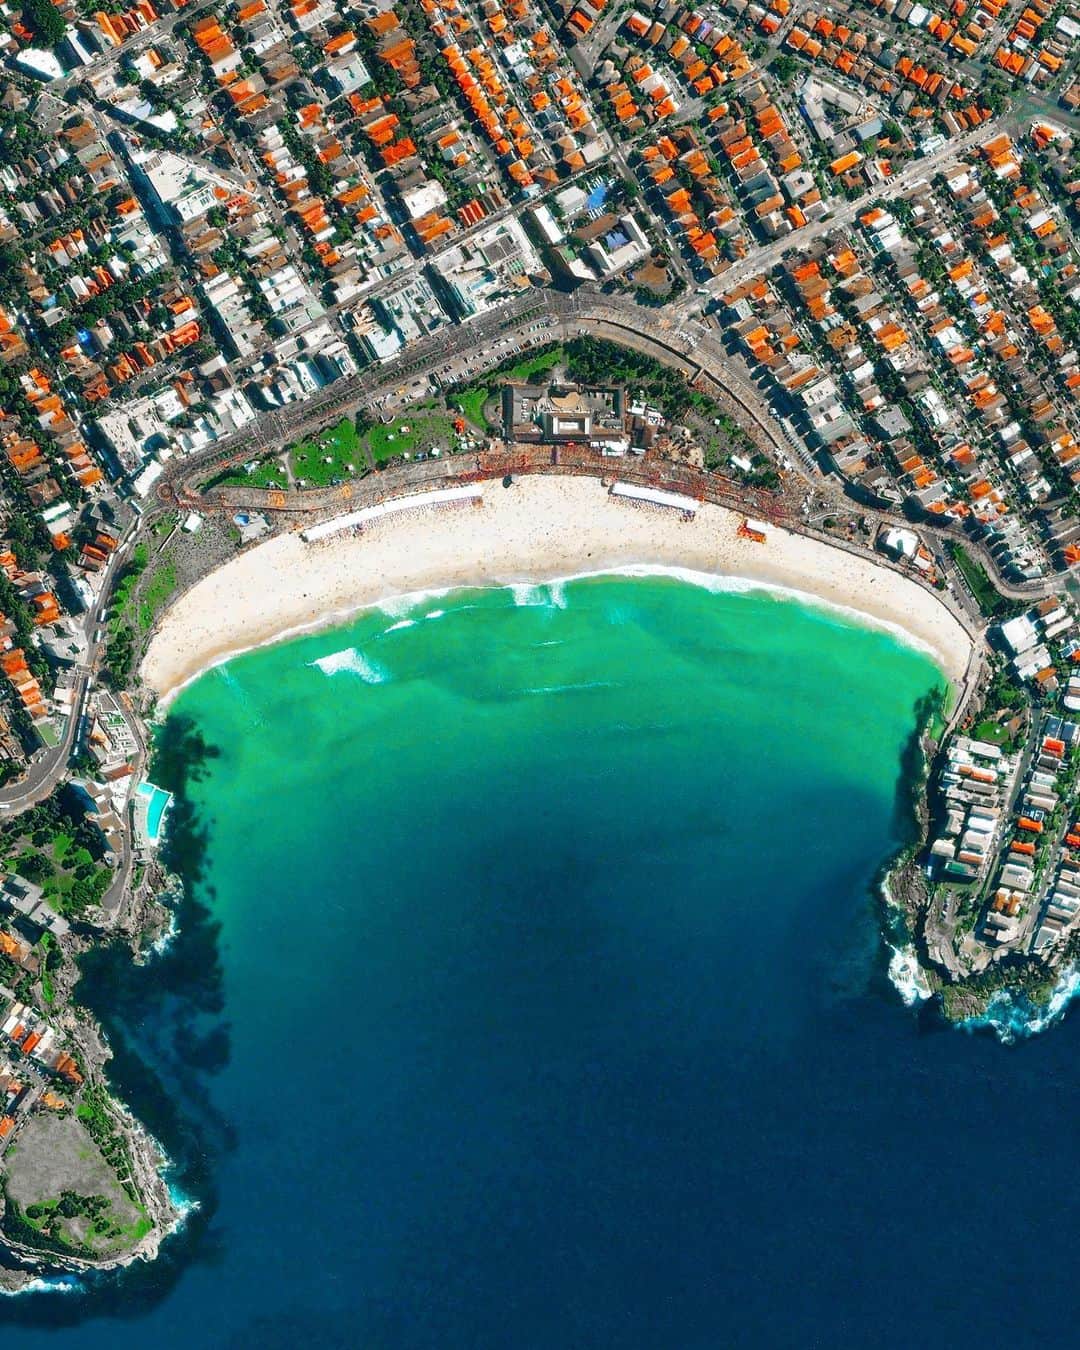 Daily Overviewのインスタグラム：「Bondi Beach is located in Sydney, Australia. One of the city’s most stunning and popular destinations, the beach gets its name from the Aboriginal word ‘Boondi’, meaning ‘waves breaking over rocks’. The beach’s surrounding neighborhood, which shares its name, is home to about 11,600 people. — Created by @overview Source imagery: @maxartechnologies」